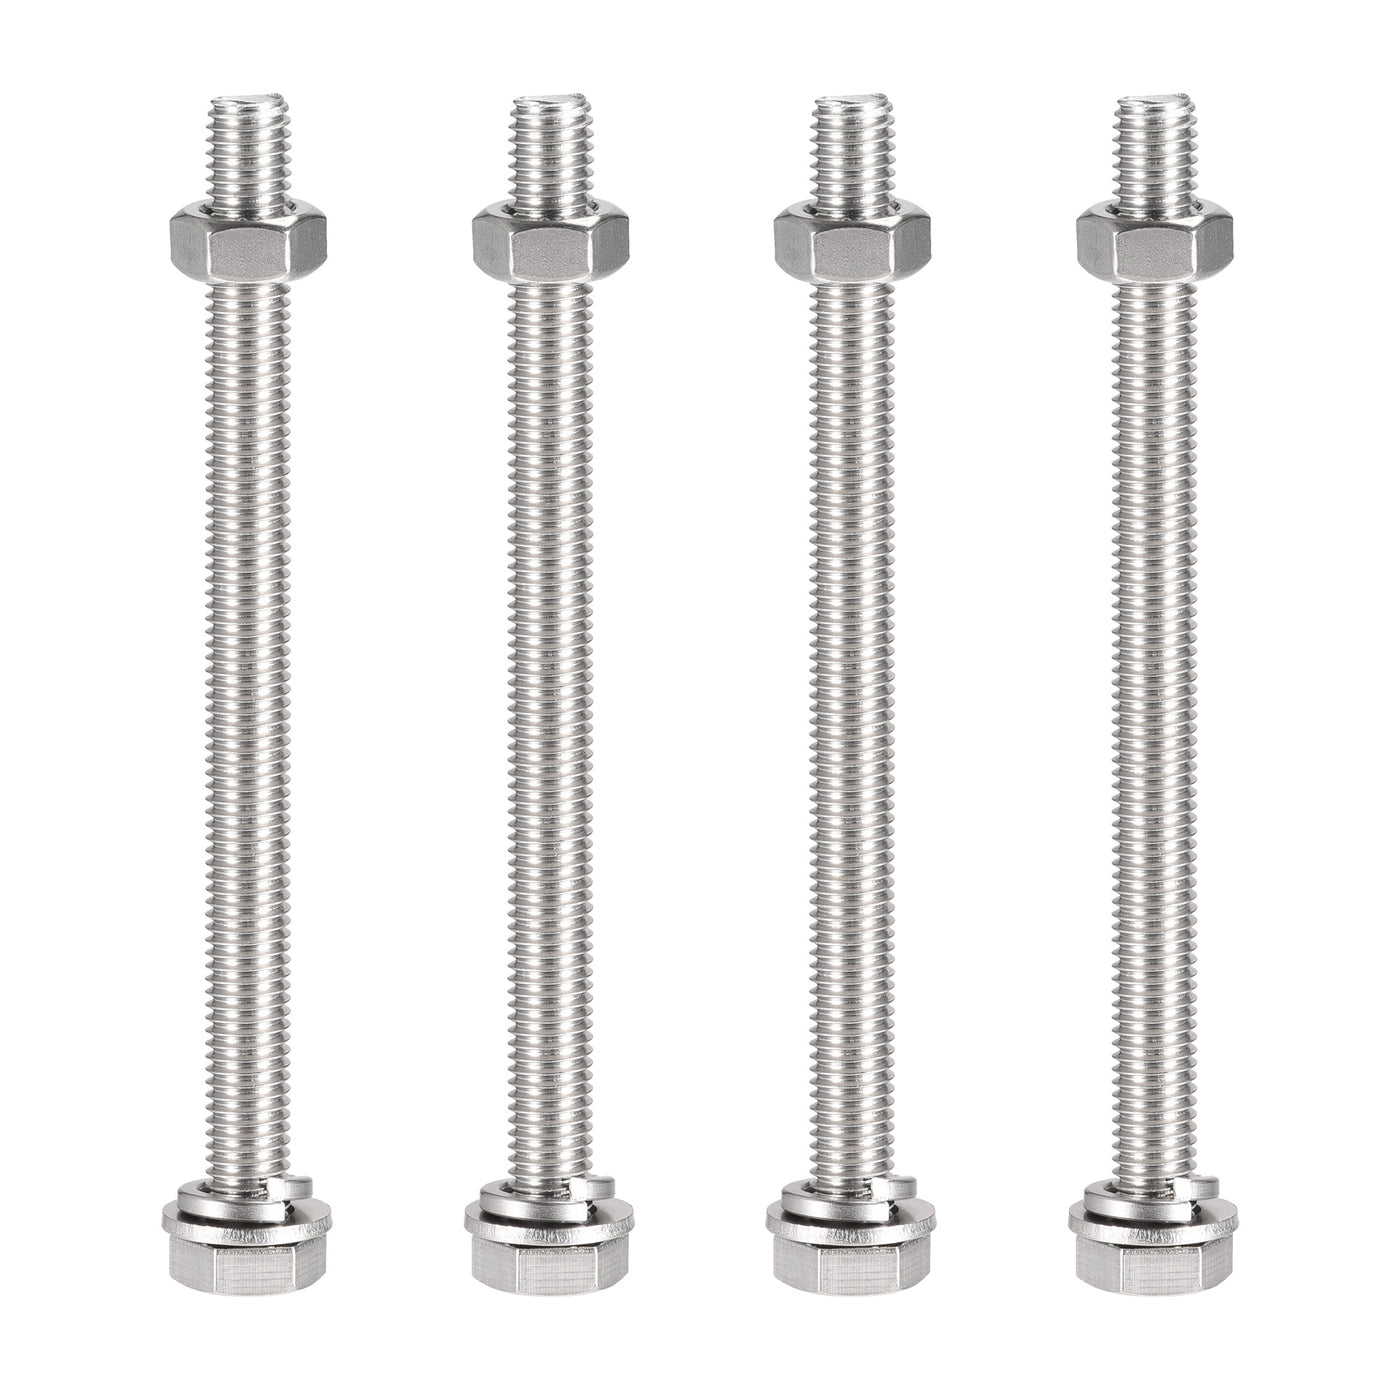 uxcell Uxcell M10 x 140mm Hex Head Screws Bolts, Nuts, Flat & Lock Washers Kits, 304 Stainless Steel Fully Thread Hexagon Bolts 4 Sets